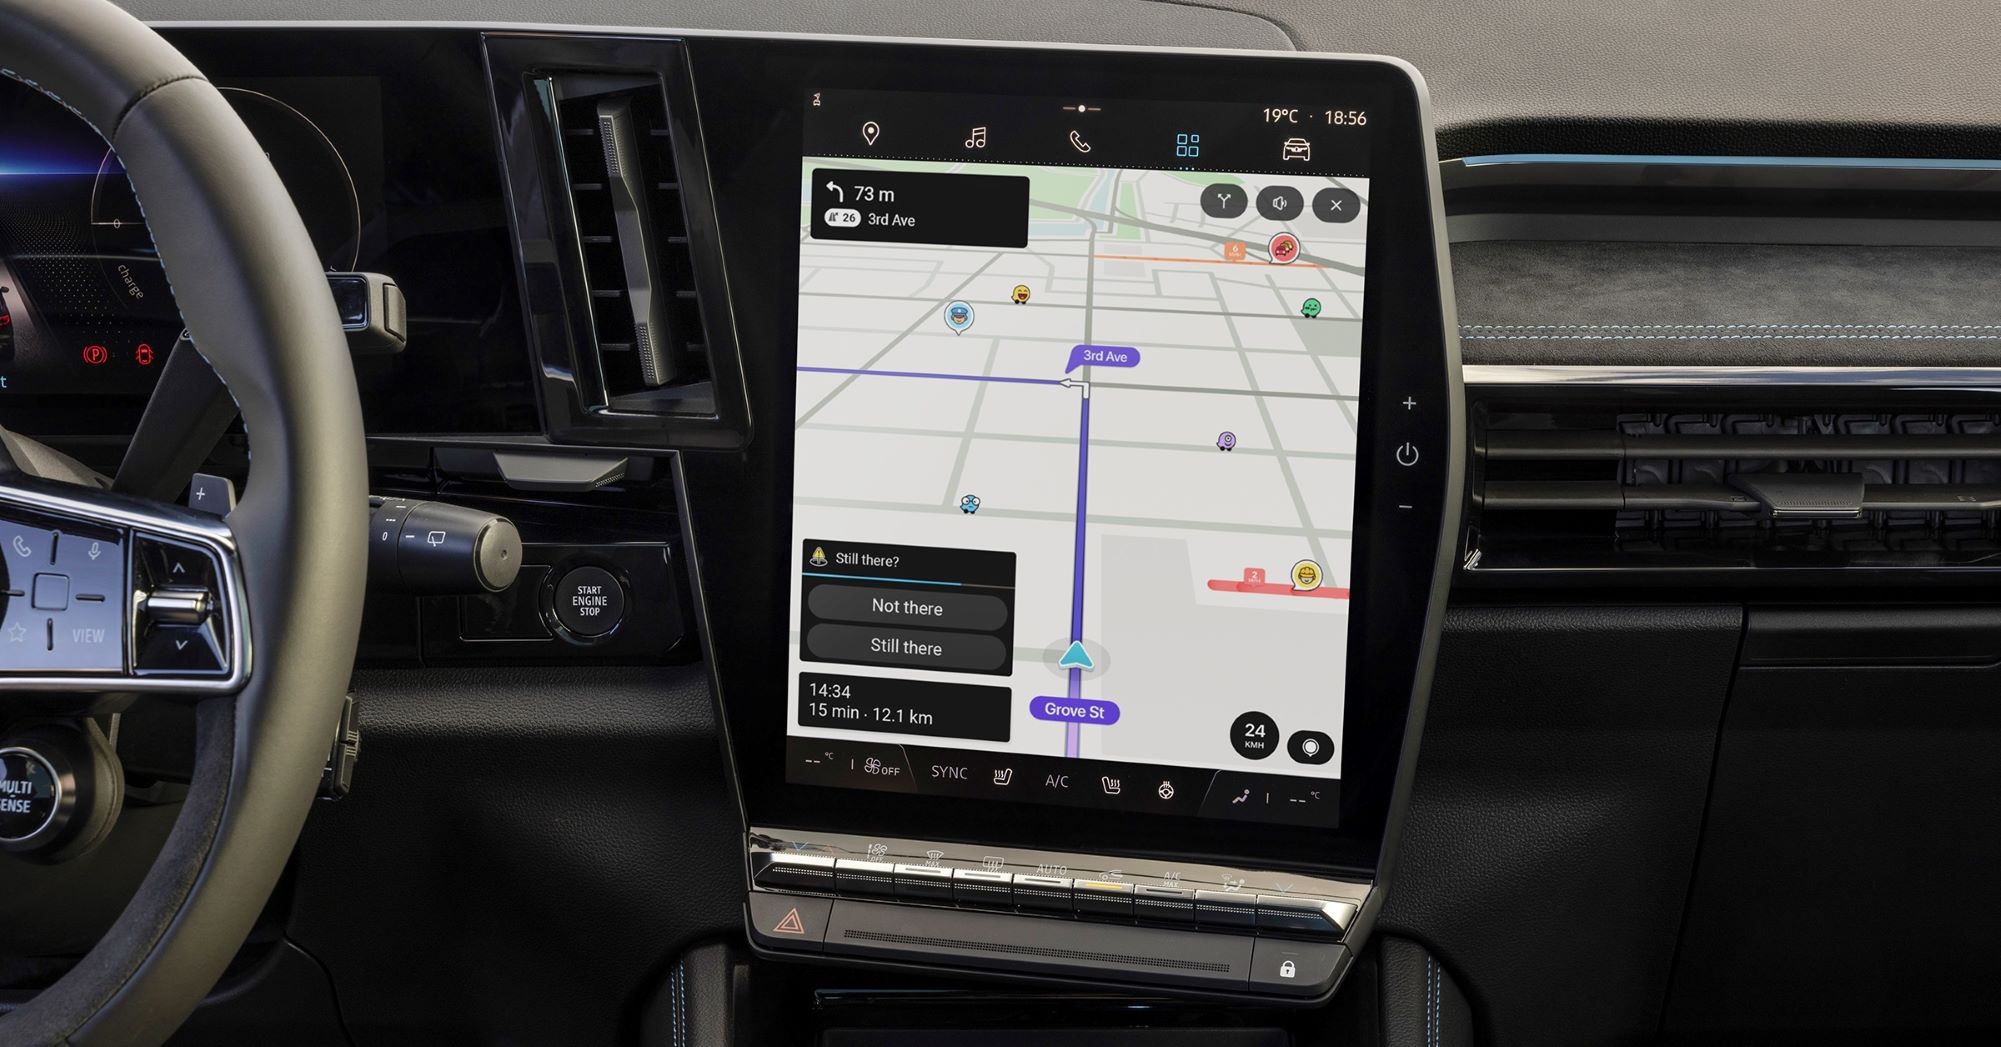 Renault's OpenR Link infotainment system open with Waze operational.